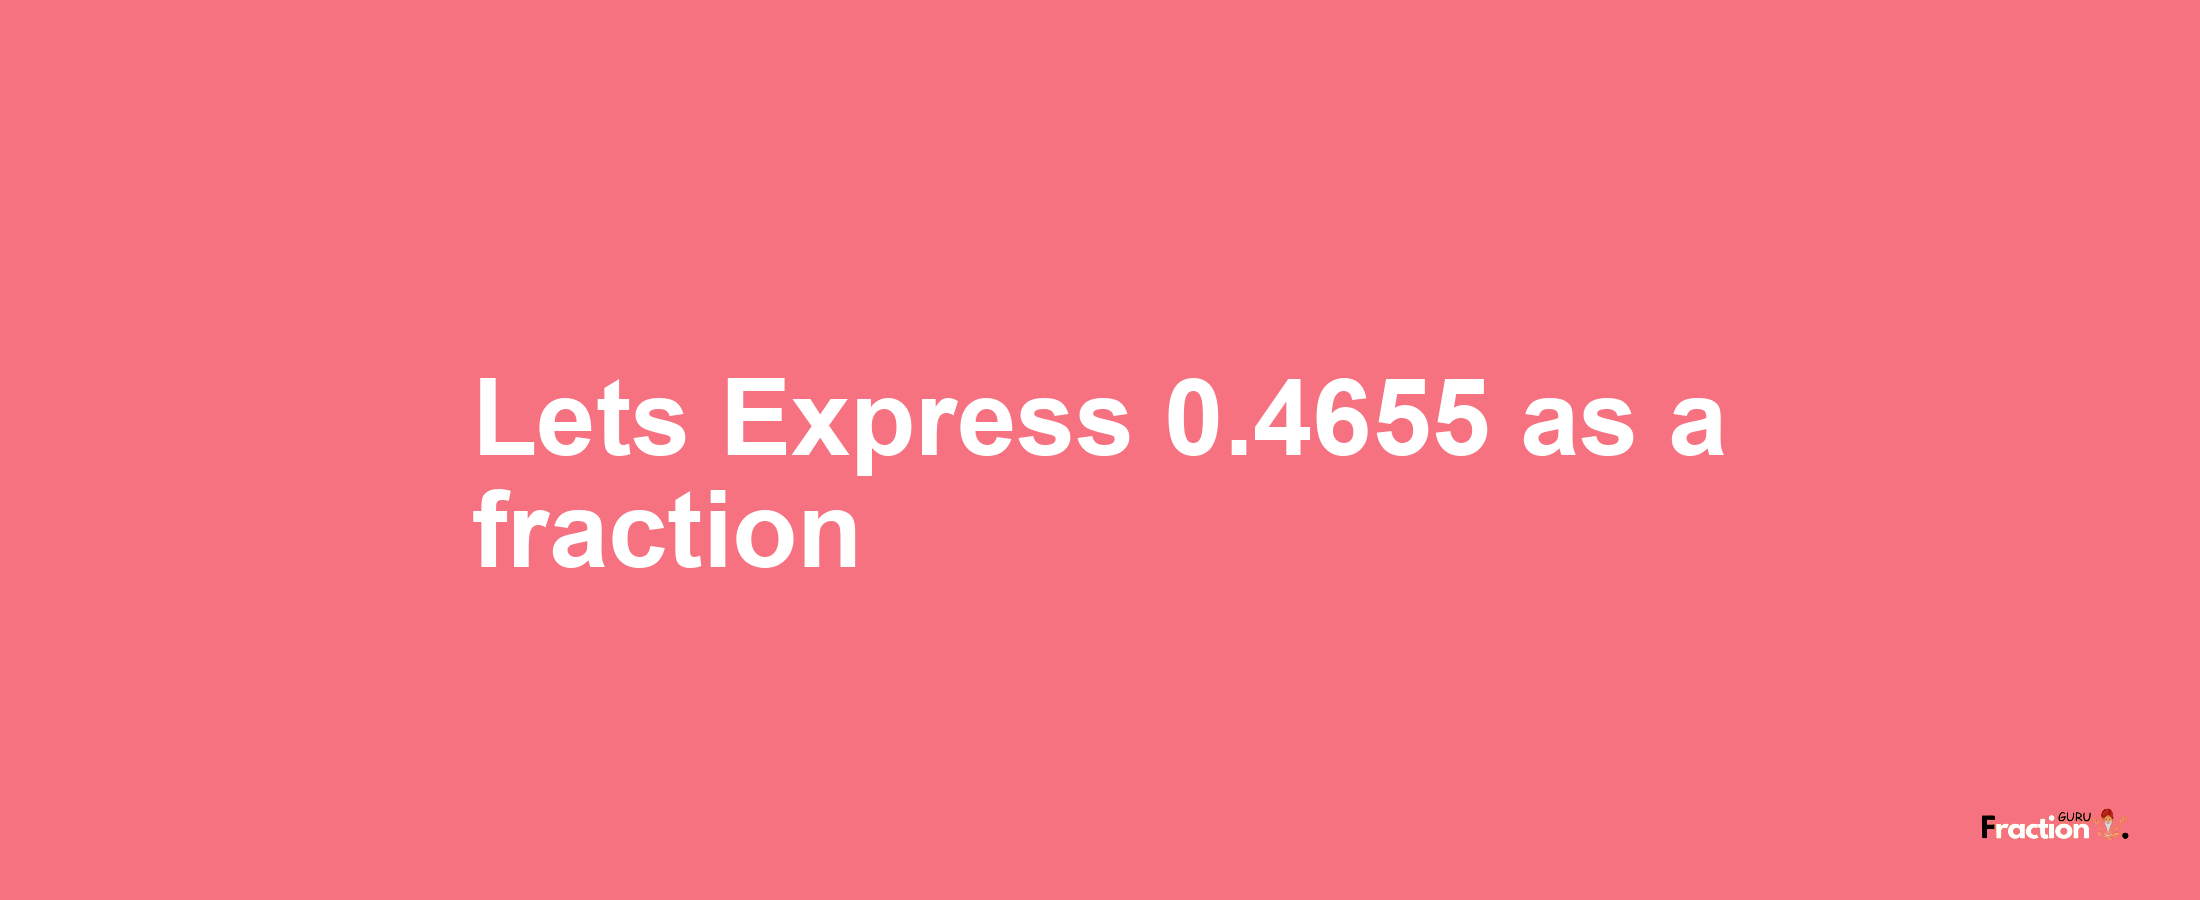 Lets Express 0.4655 as afraction